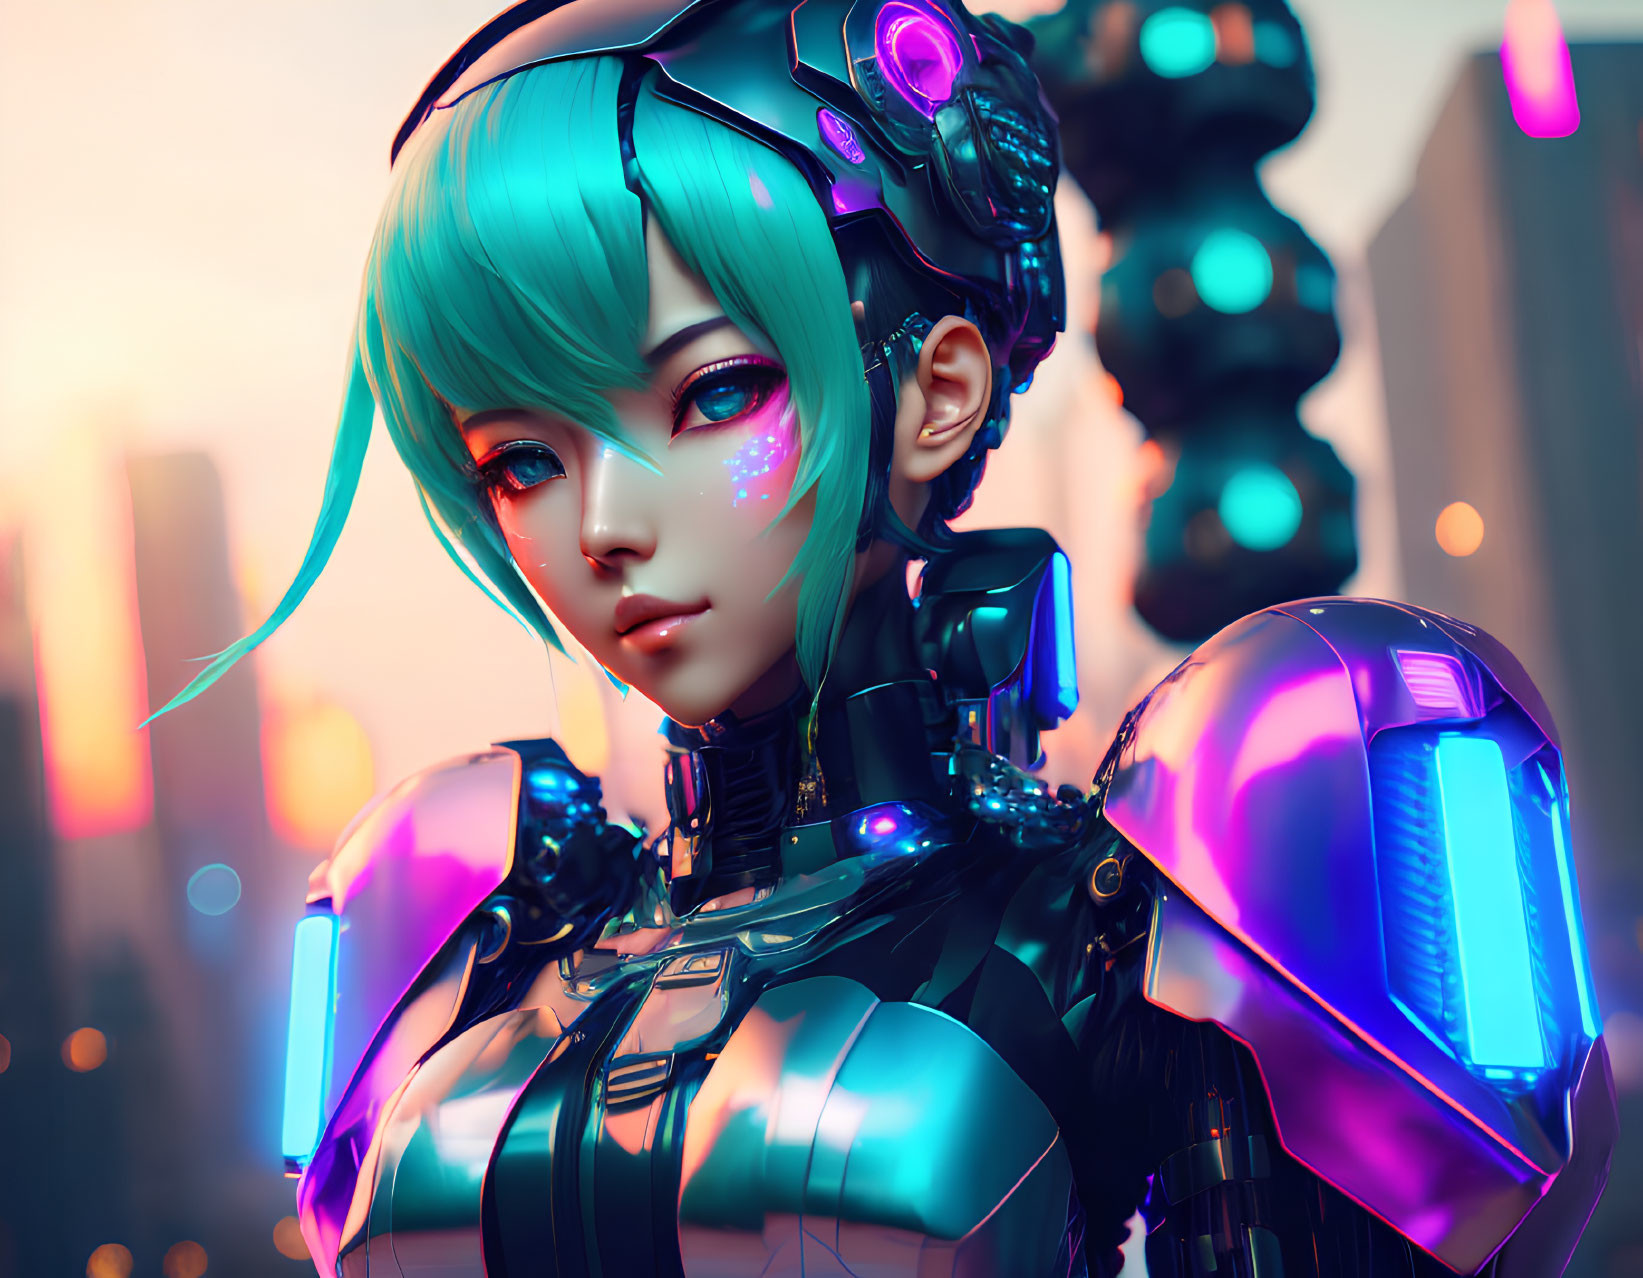 Futuristic female android with blue hair and cybernetic enhancements in cityscape at dusk